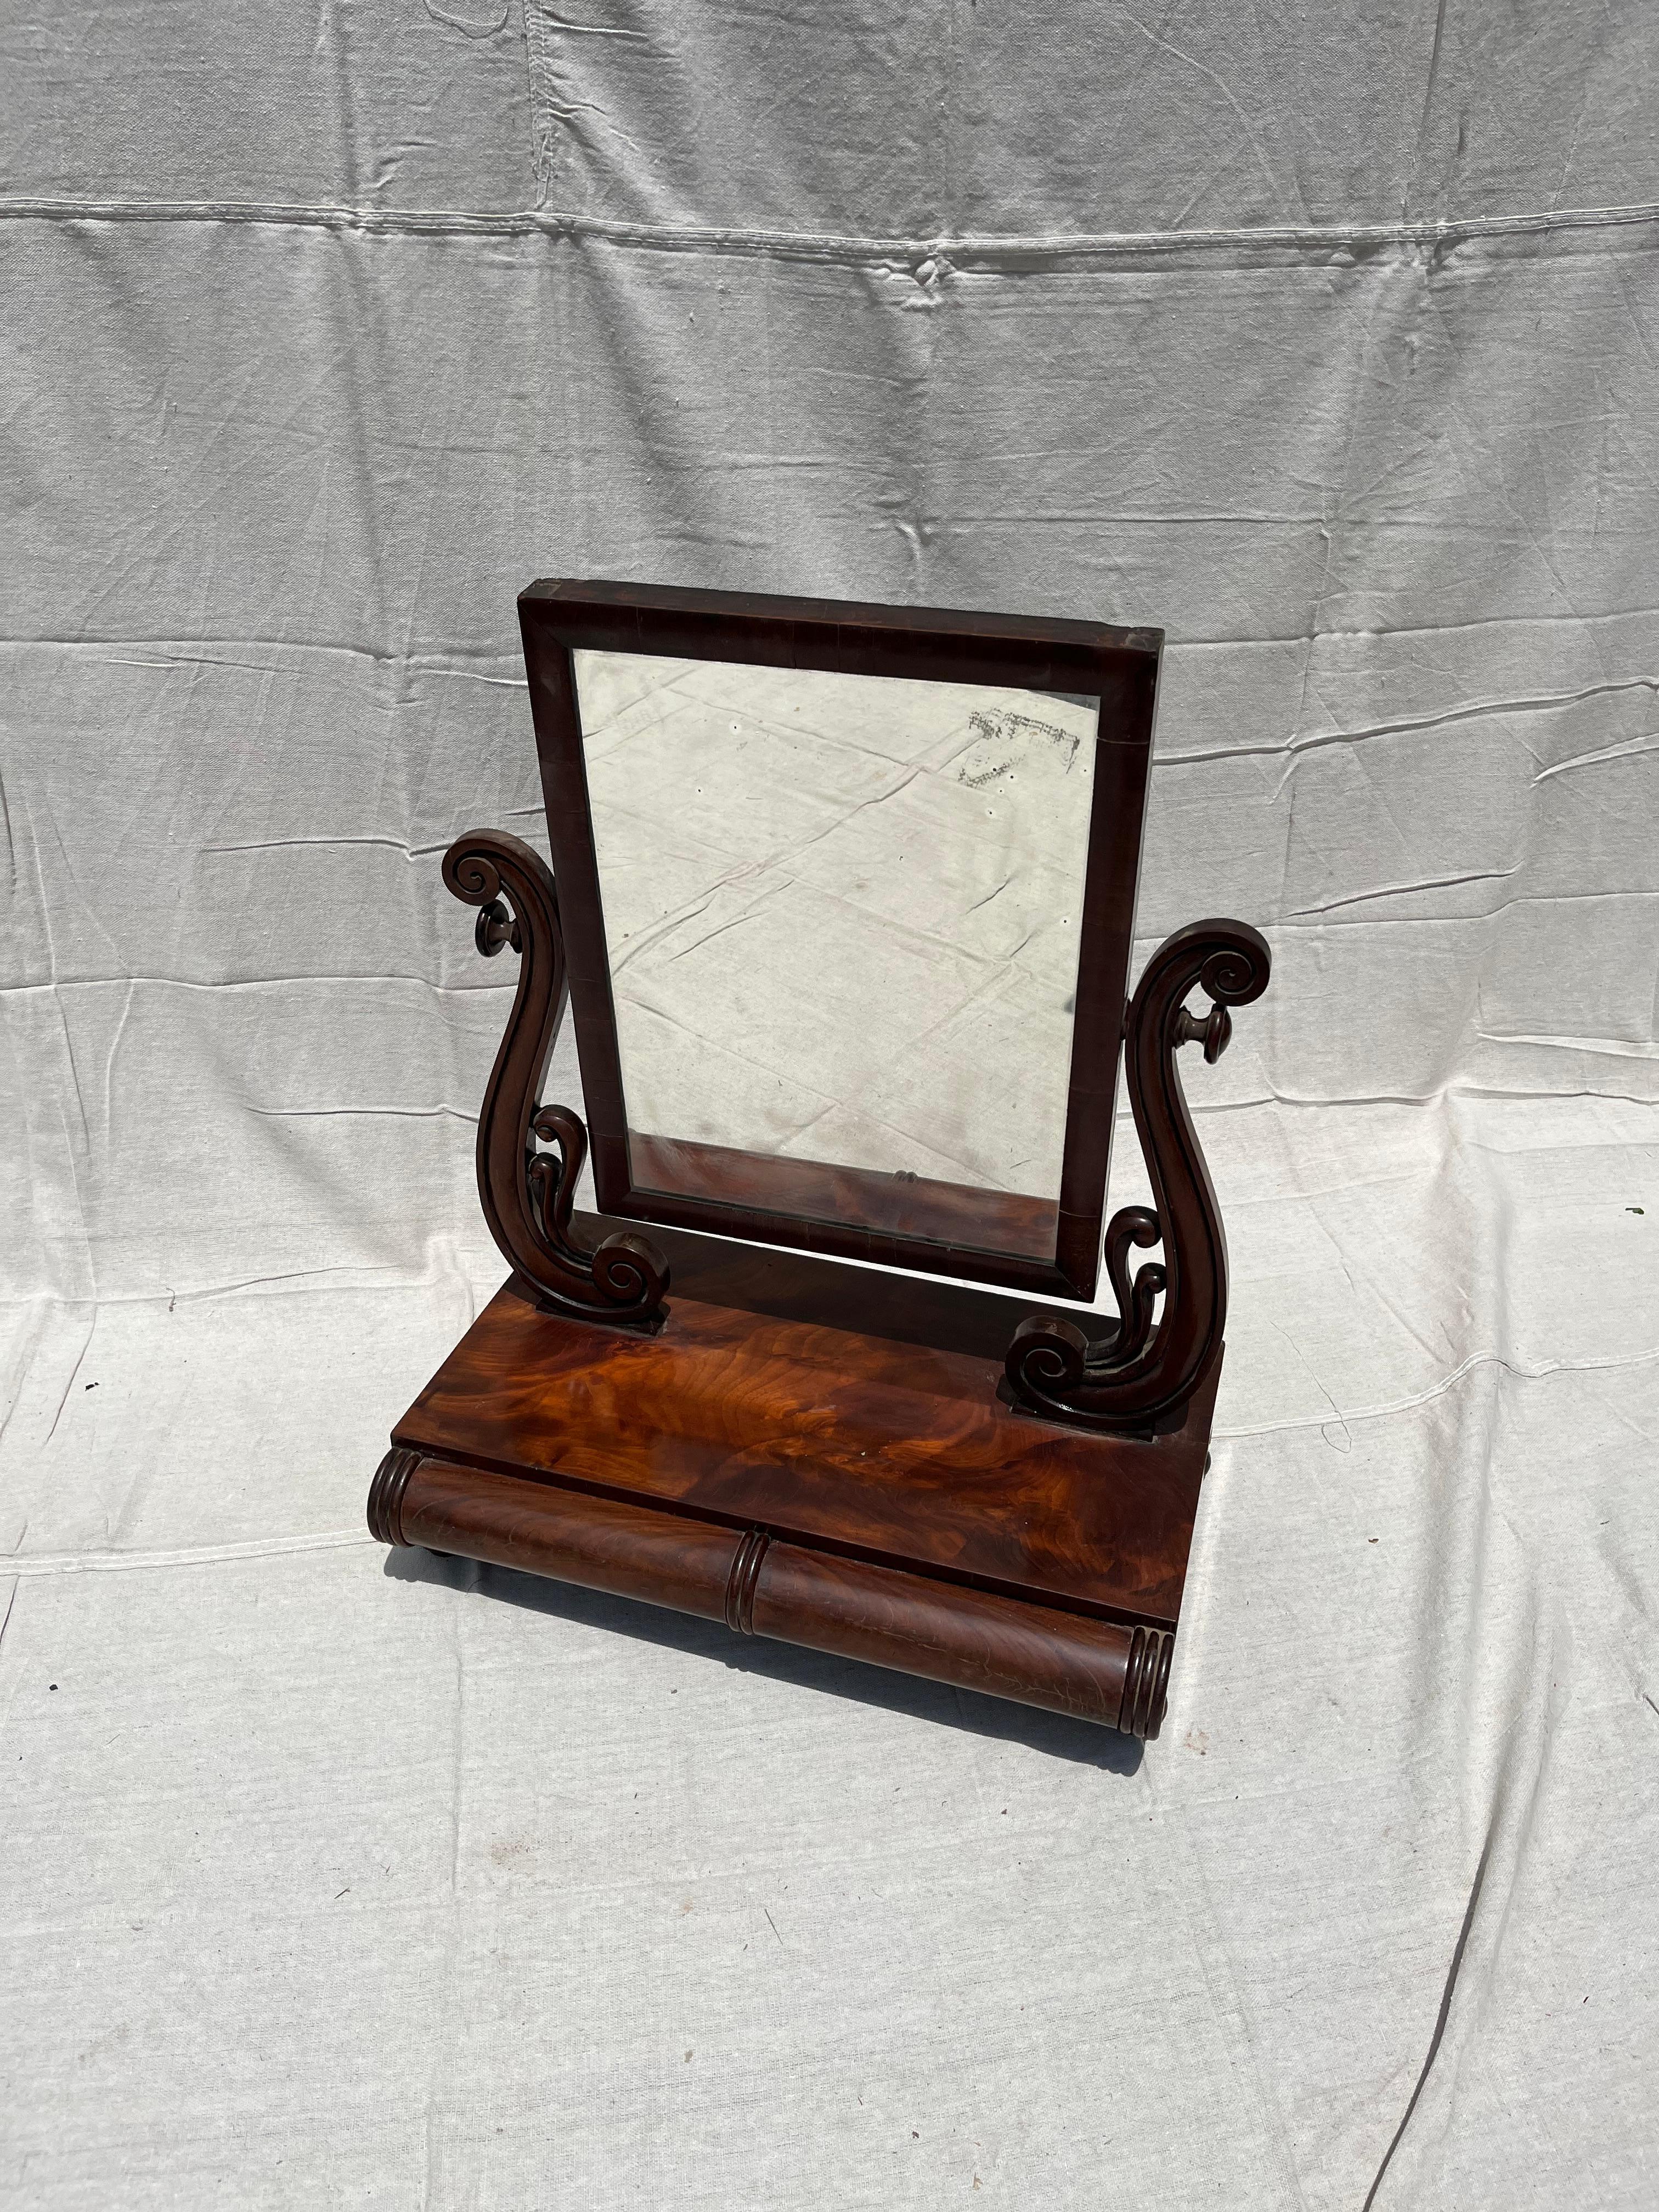 A Regency dressing mirror in figured mahogany with 2 small jewelry drawers and adjustable mirror.